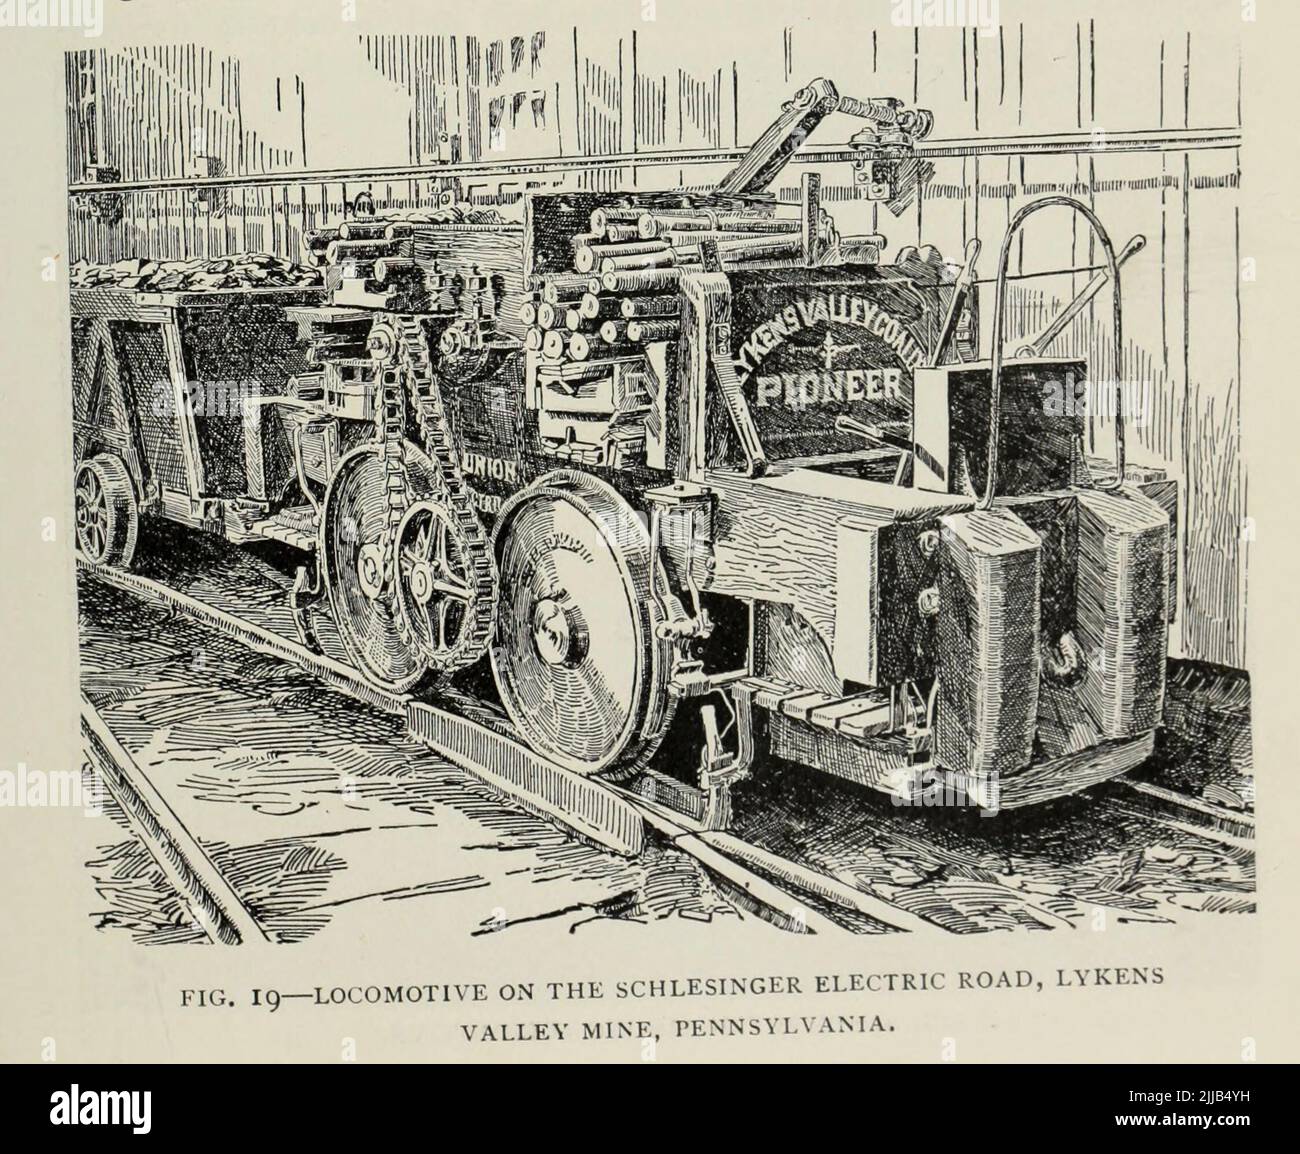 LOCOMOTIVE ON THE SCHLESINGER ELECTRIC ROAD, LYKENS VALLEY MINE, PENNSYLVANIA from the article ' DEVELOPMENT OF THE ELECTRIC LOCOMOTIVE ' By B. J. Arnold, M. Am. Inst. E. E. from The Engineering Magazine DEVOTED TO INDUSTRIAL PROGRESS Volume VII April to September, 1894 NEW YORK The Engineering Magazine Co Stock Photo